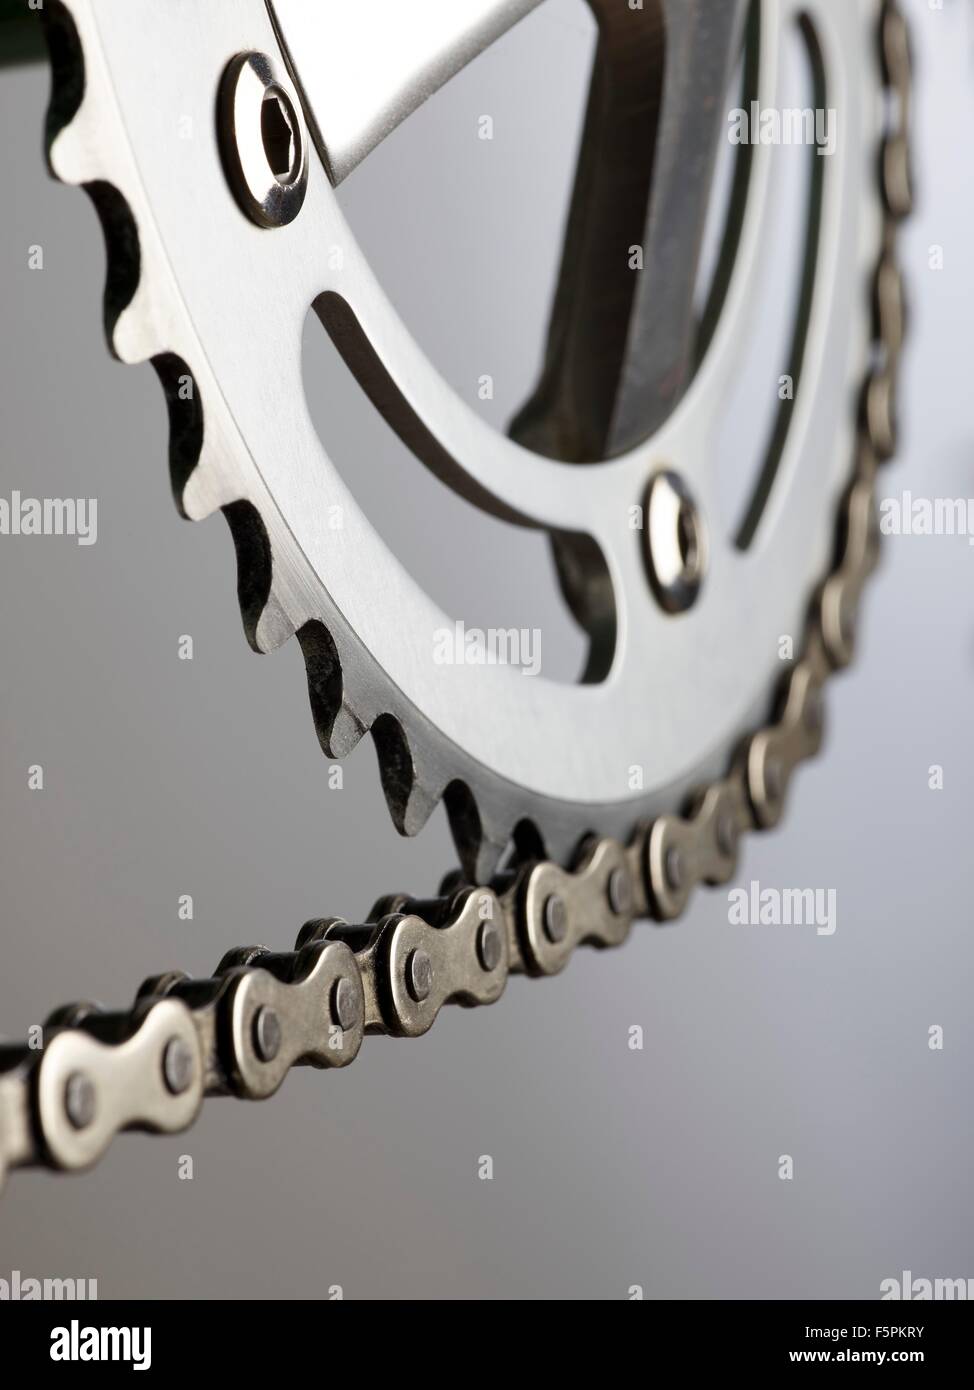 Bicycle chain and crank, close up. Stock Photo